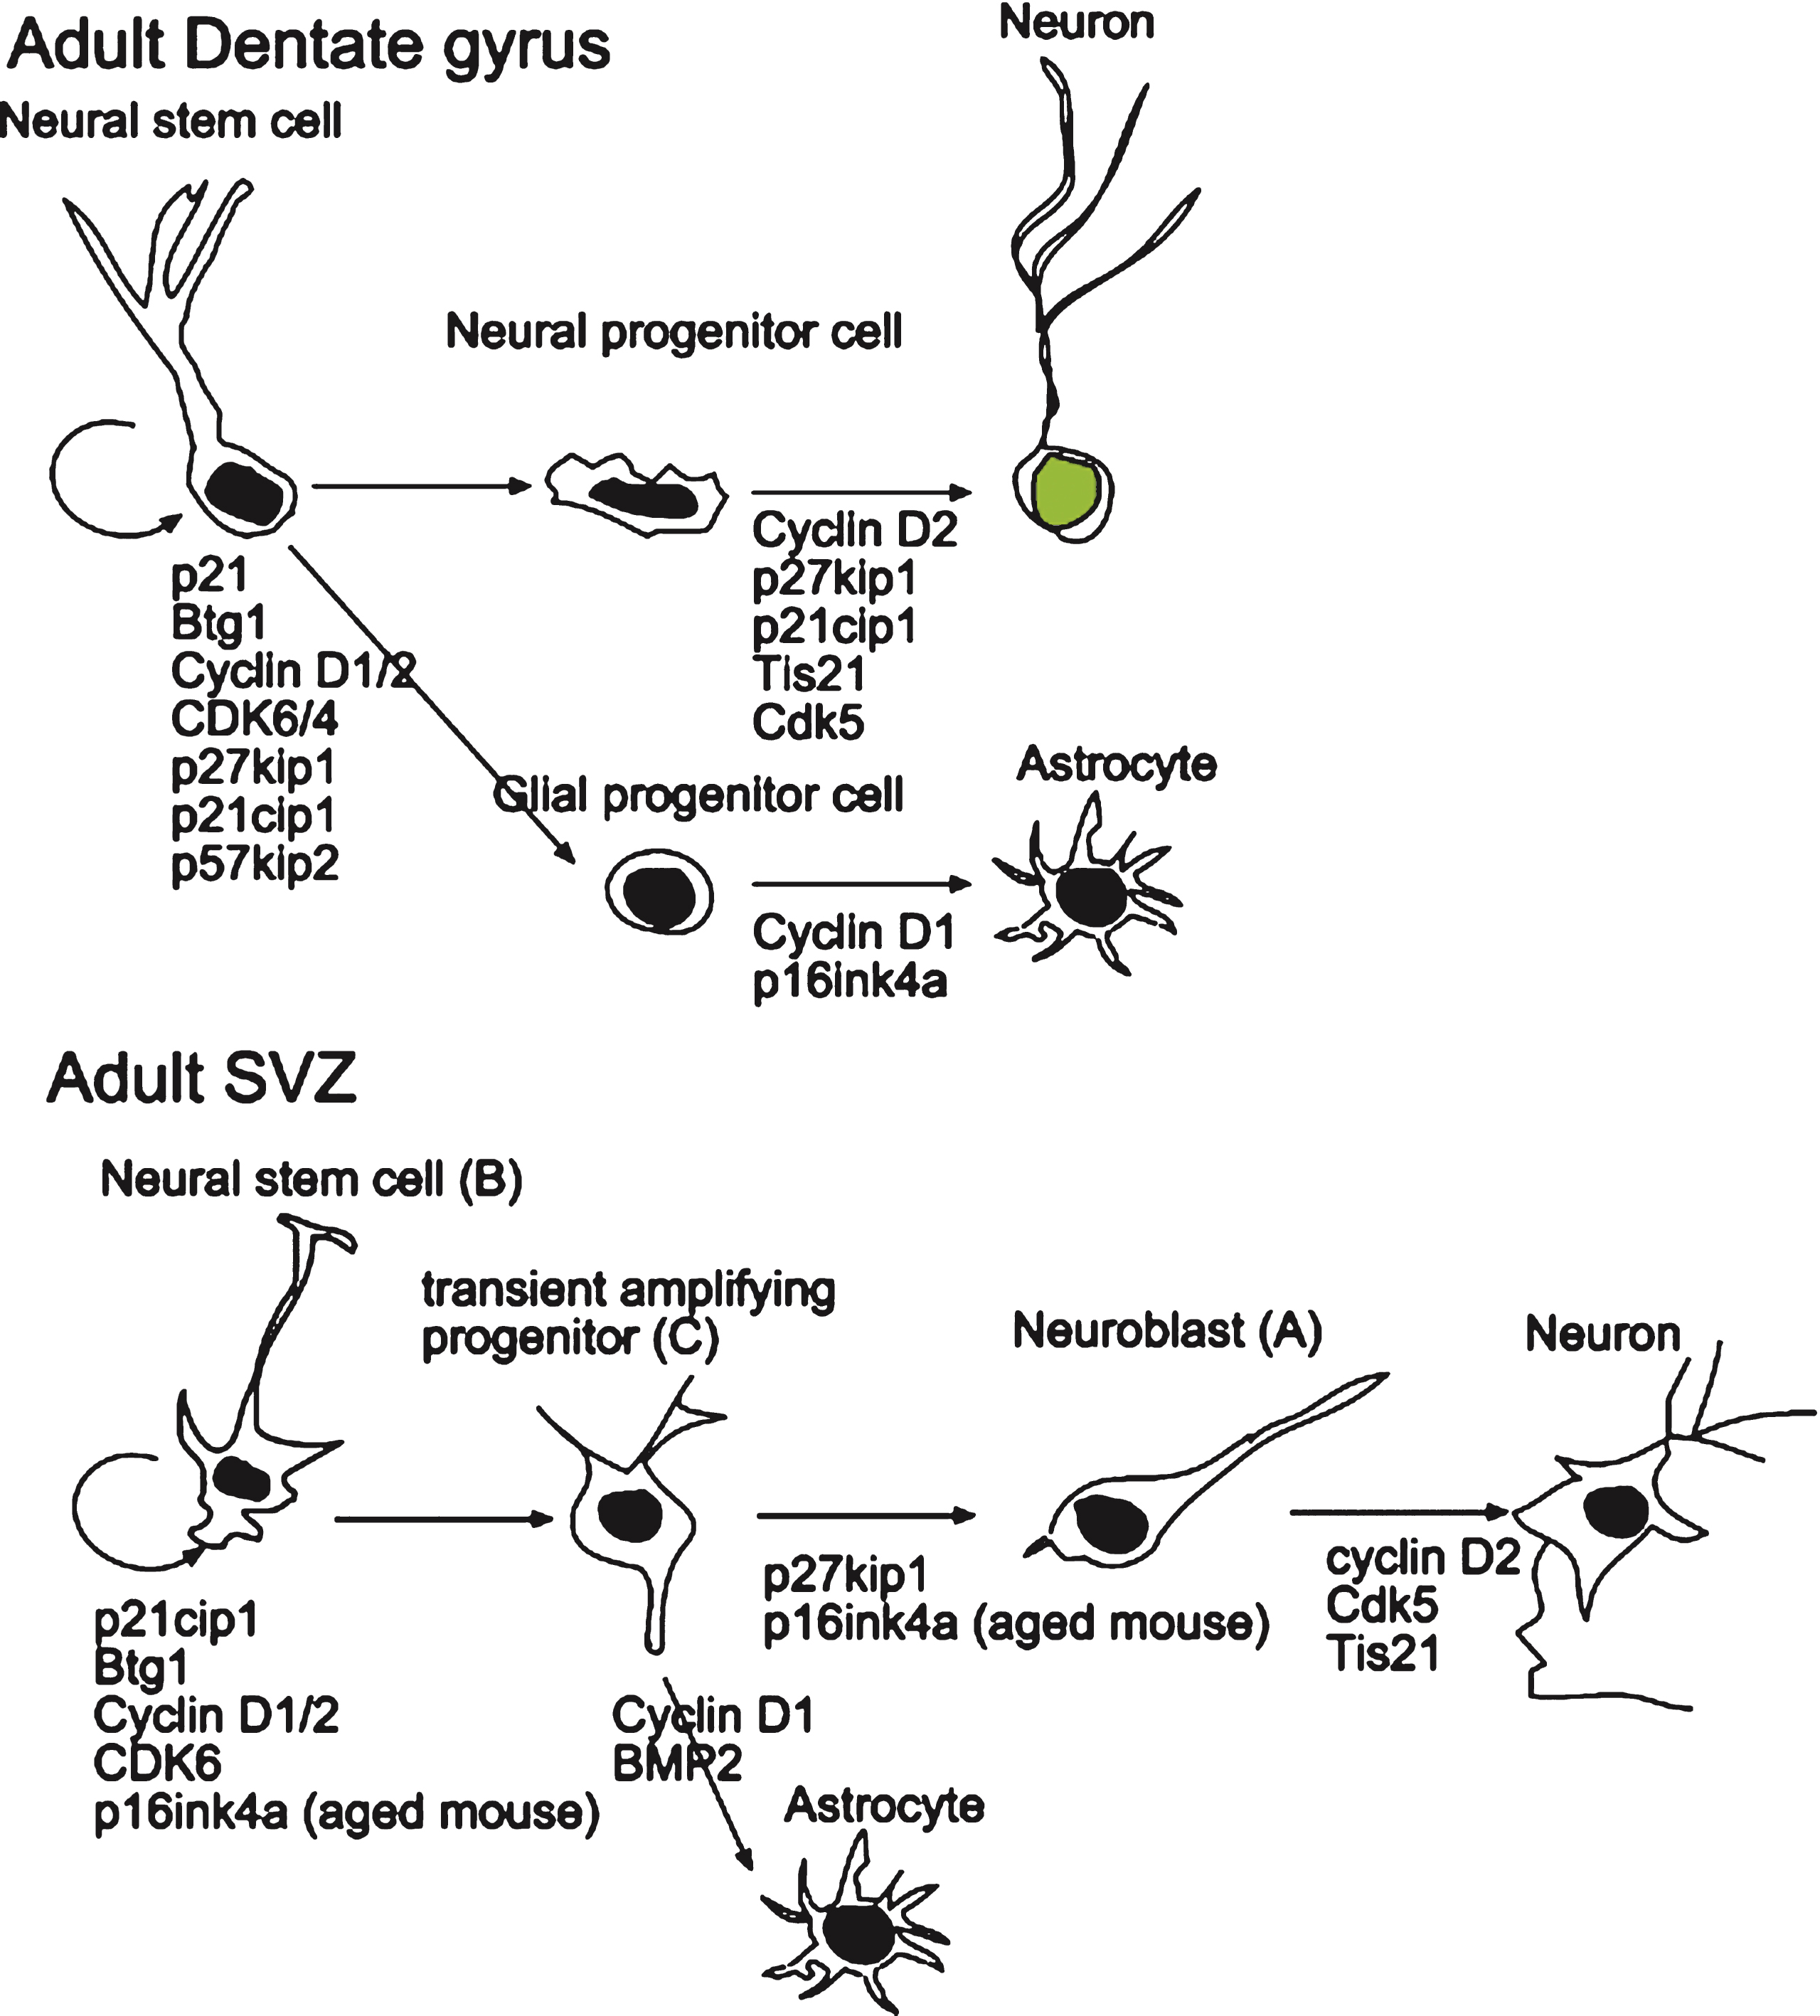 Scheme depicting the role of cell cycle-related molecules on the proliferation and differentiation of stem and progenitor cells in the adult dentate gyrus and SVZ. The data were obtained by knockout experiments performed in vitro and in vivo and are detailed in the text. Dentate gyrus: Cdk6 and cyclin D1/2 are required for the proliferation of stem cells, while p27Kip1 or p21Cip1 are required to maintain the quiescence of stem cells. Moreover, cyclin D1 is involved in astrocytic differentiation while cyclin D2, p27Kip1, p21Cip1 and Tis21 are involved in the commitment of neural stem cells to the neuronal differentiation. SVZ: Cdk6 and cyclin D1/2 appear to be required for the proliferation of stem cells, while p16Ink4a and Btg1 are necessary to maintain the quiescence of stem cells, in aging or in adult mouse, respectively. Cyclin D2, Cdk5 and Tis21 are involved or required for neuronal differentiation.